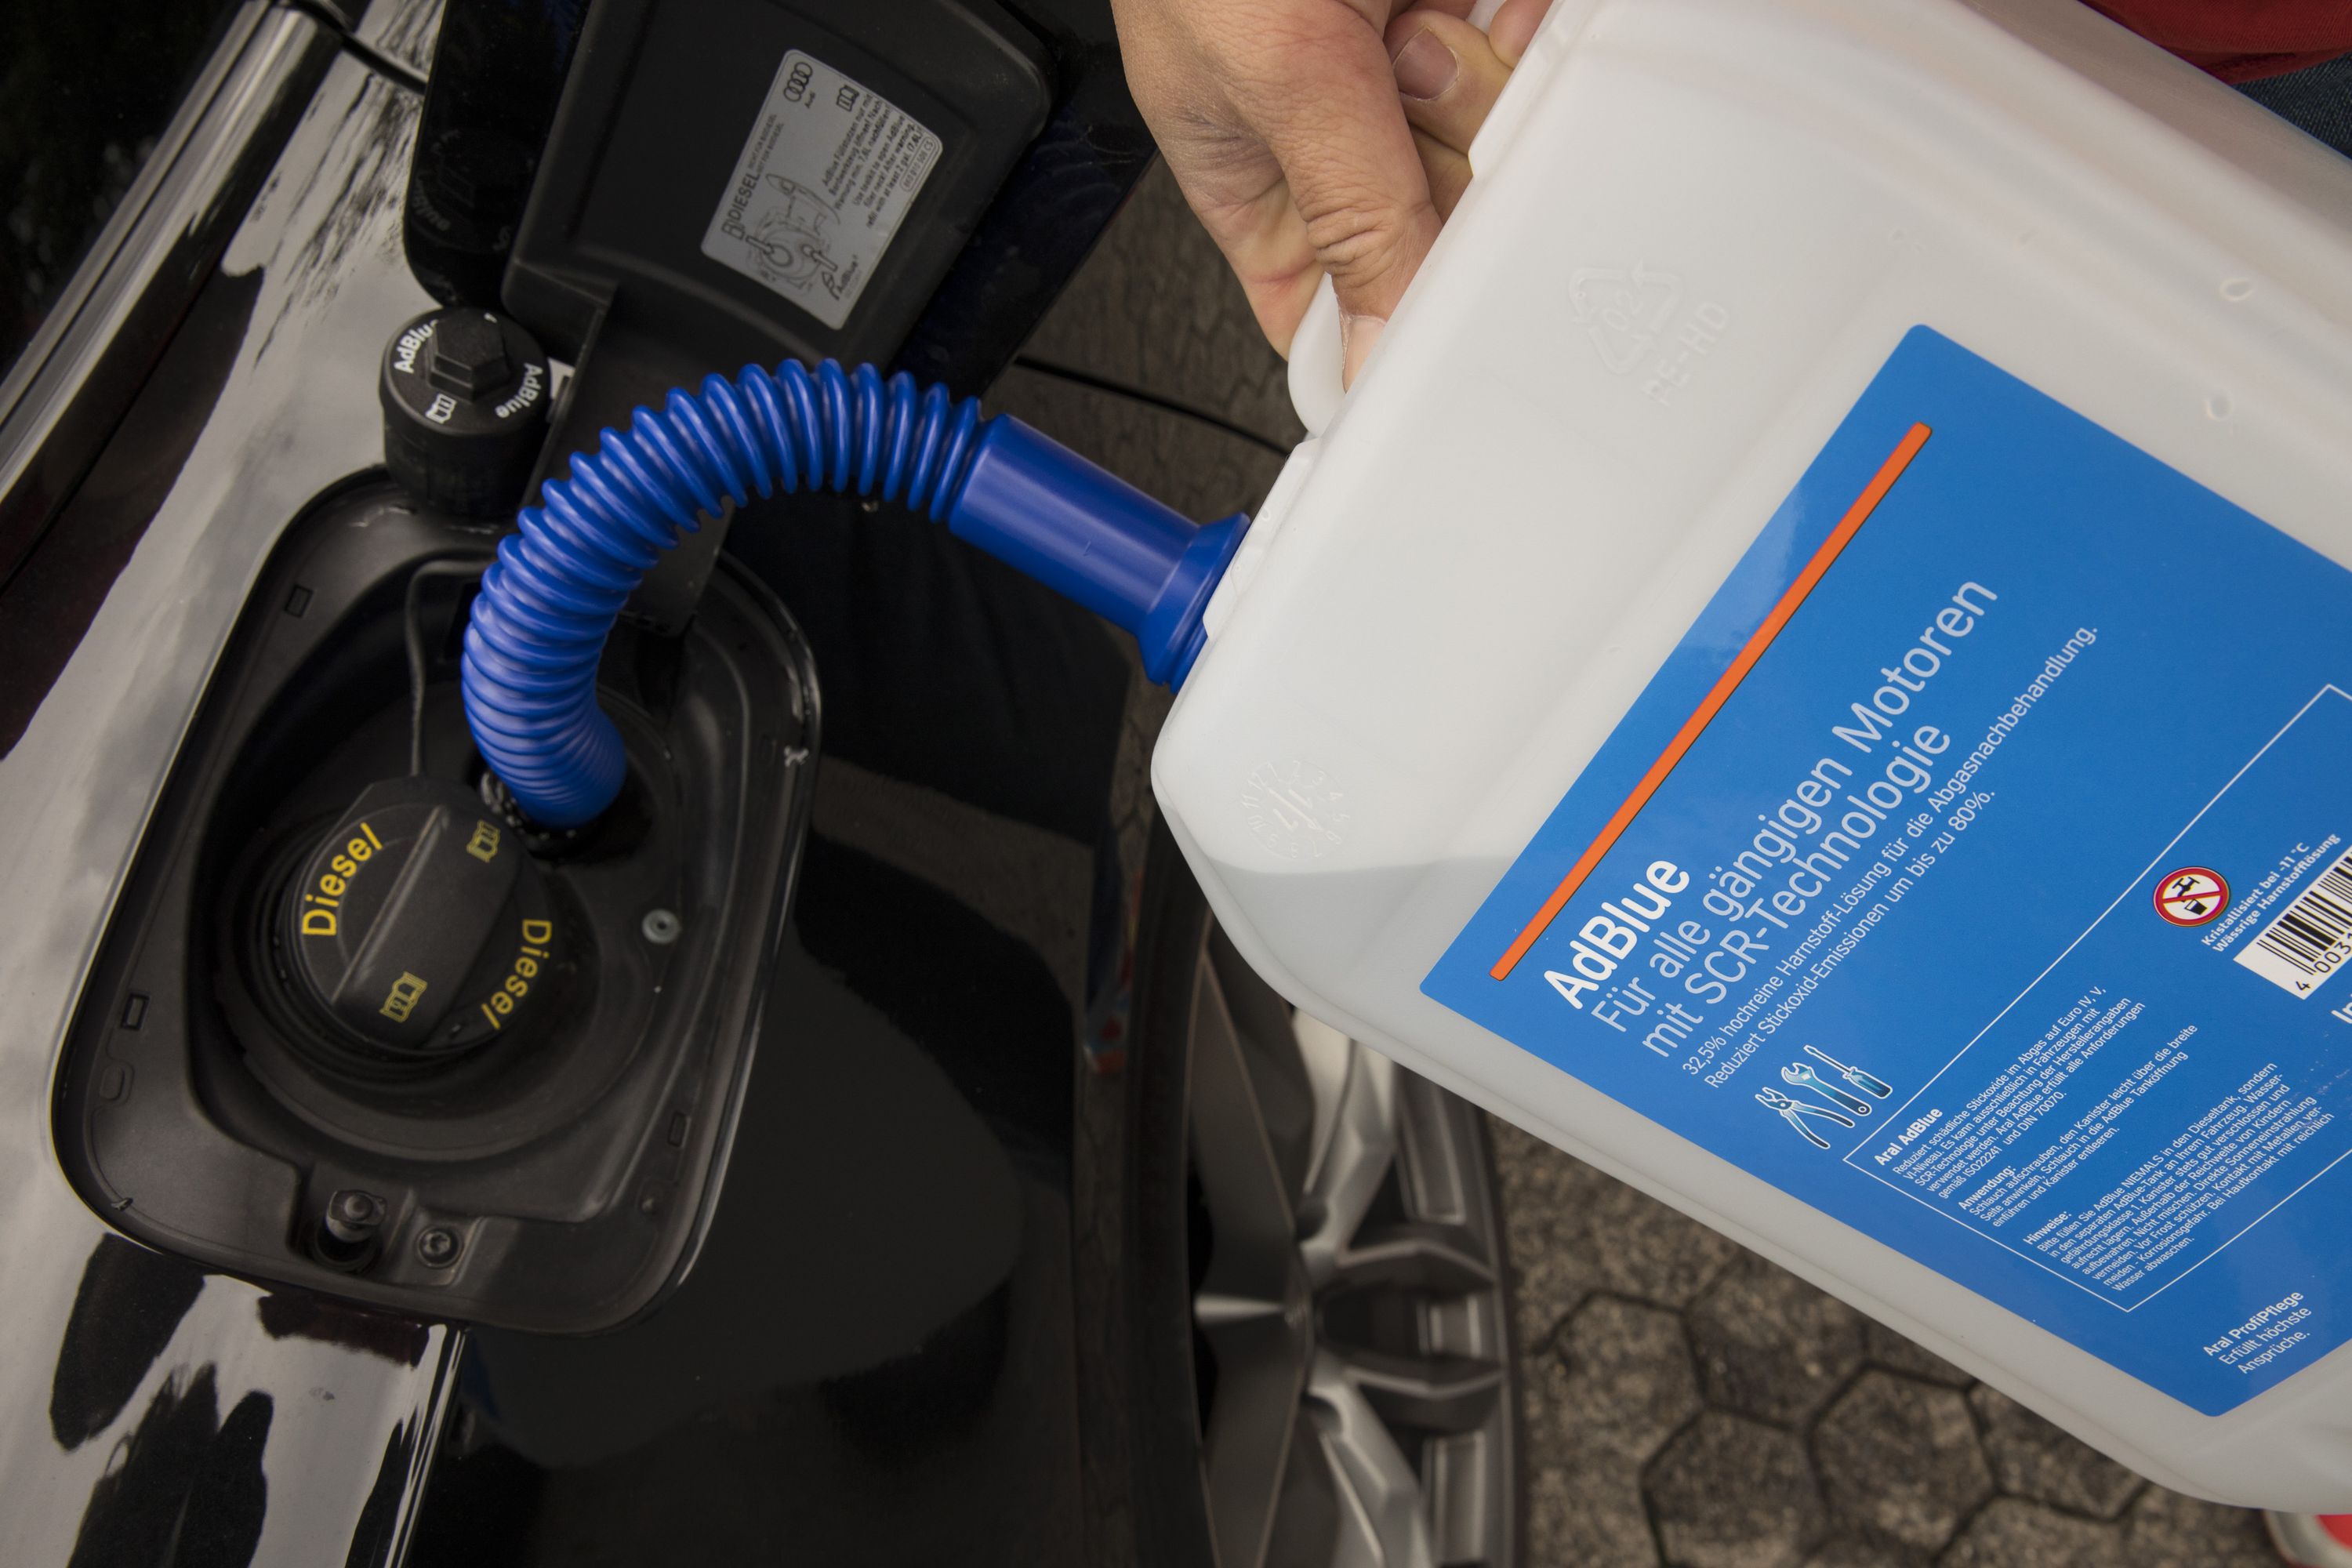 AdBlue! What is it and how does it work in certain diesel vehicles?, Auto  News